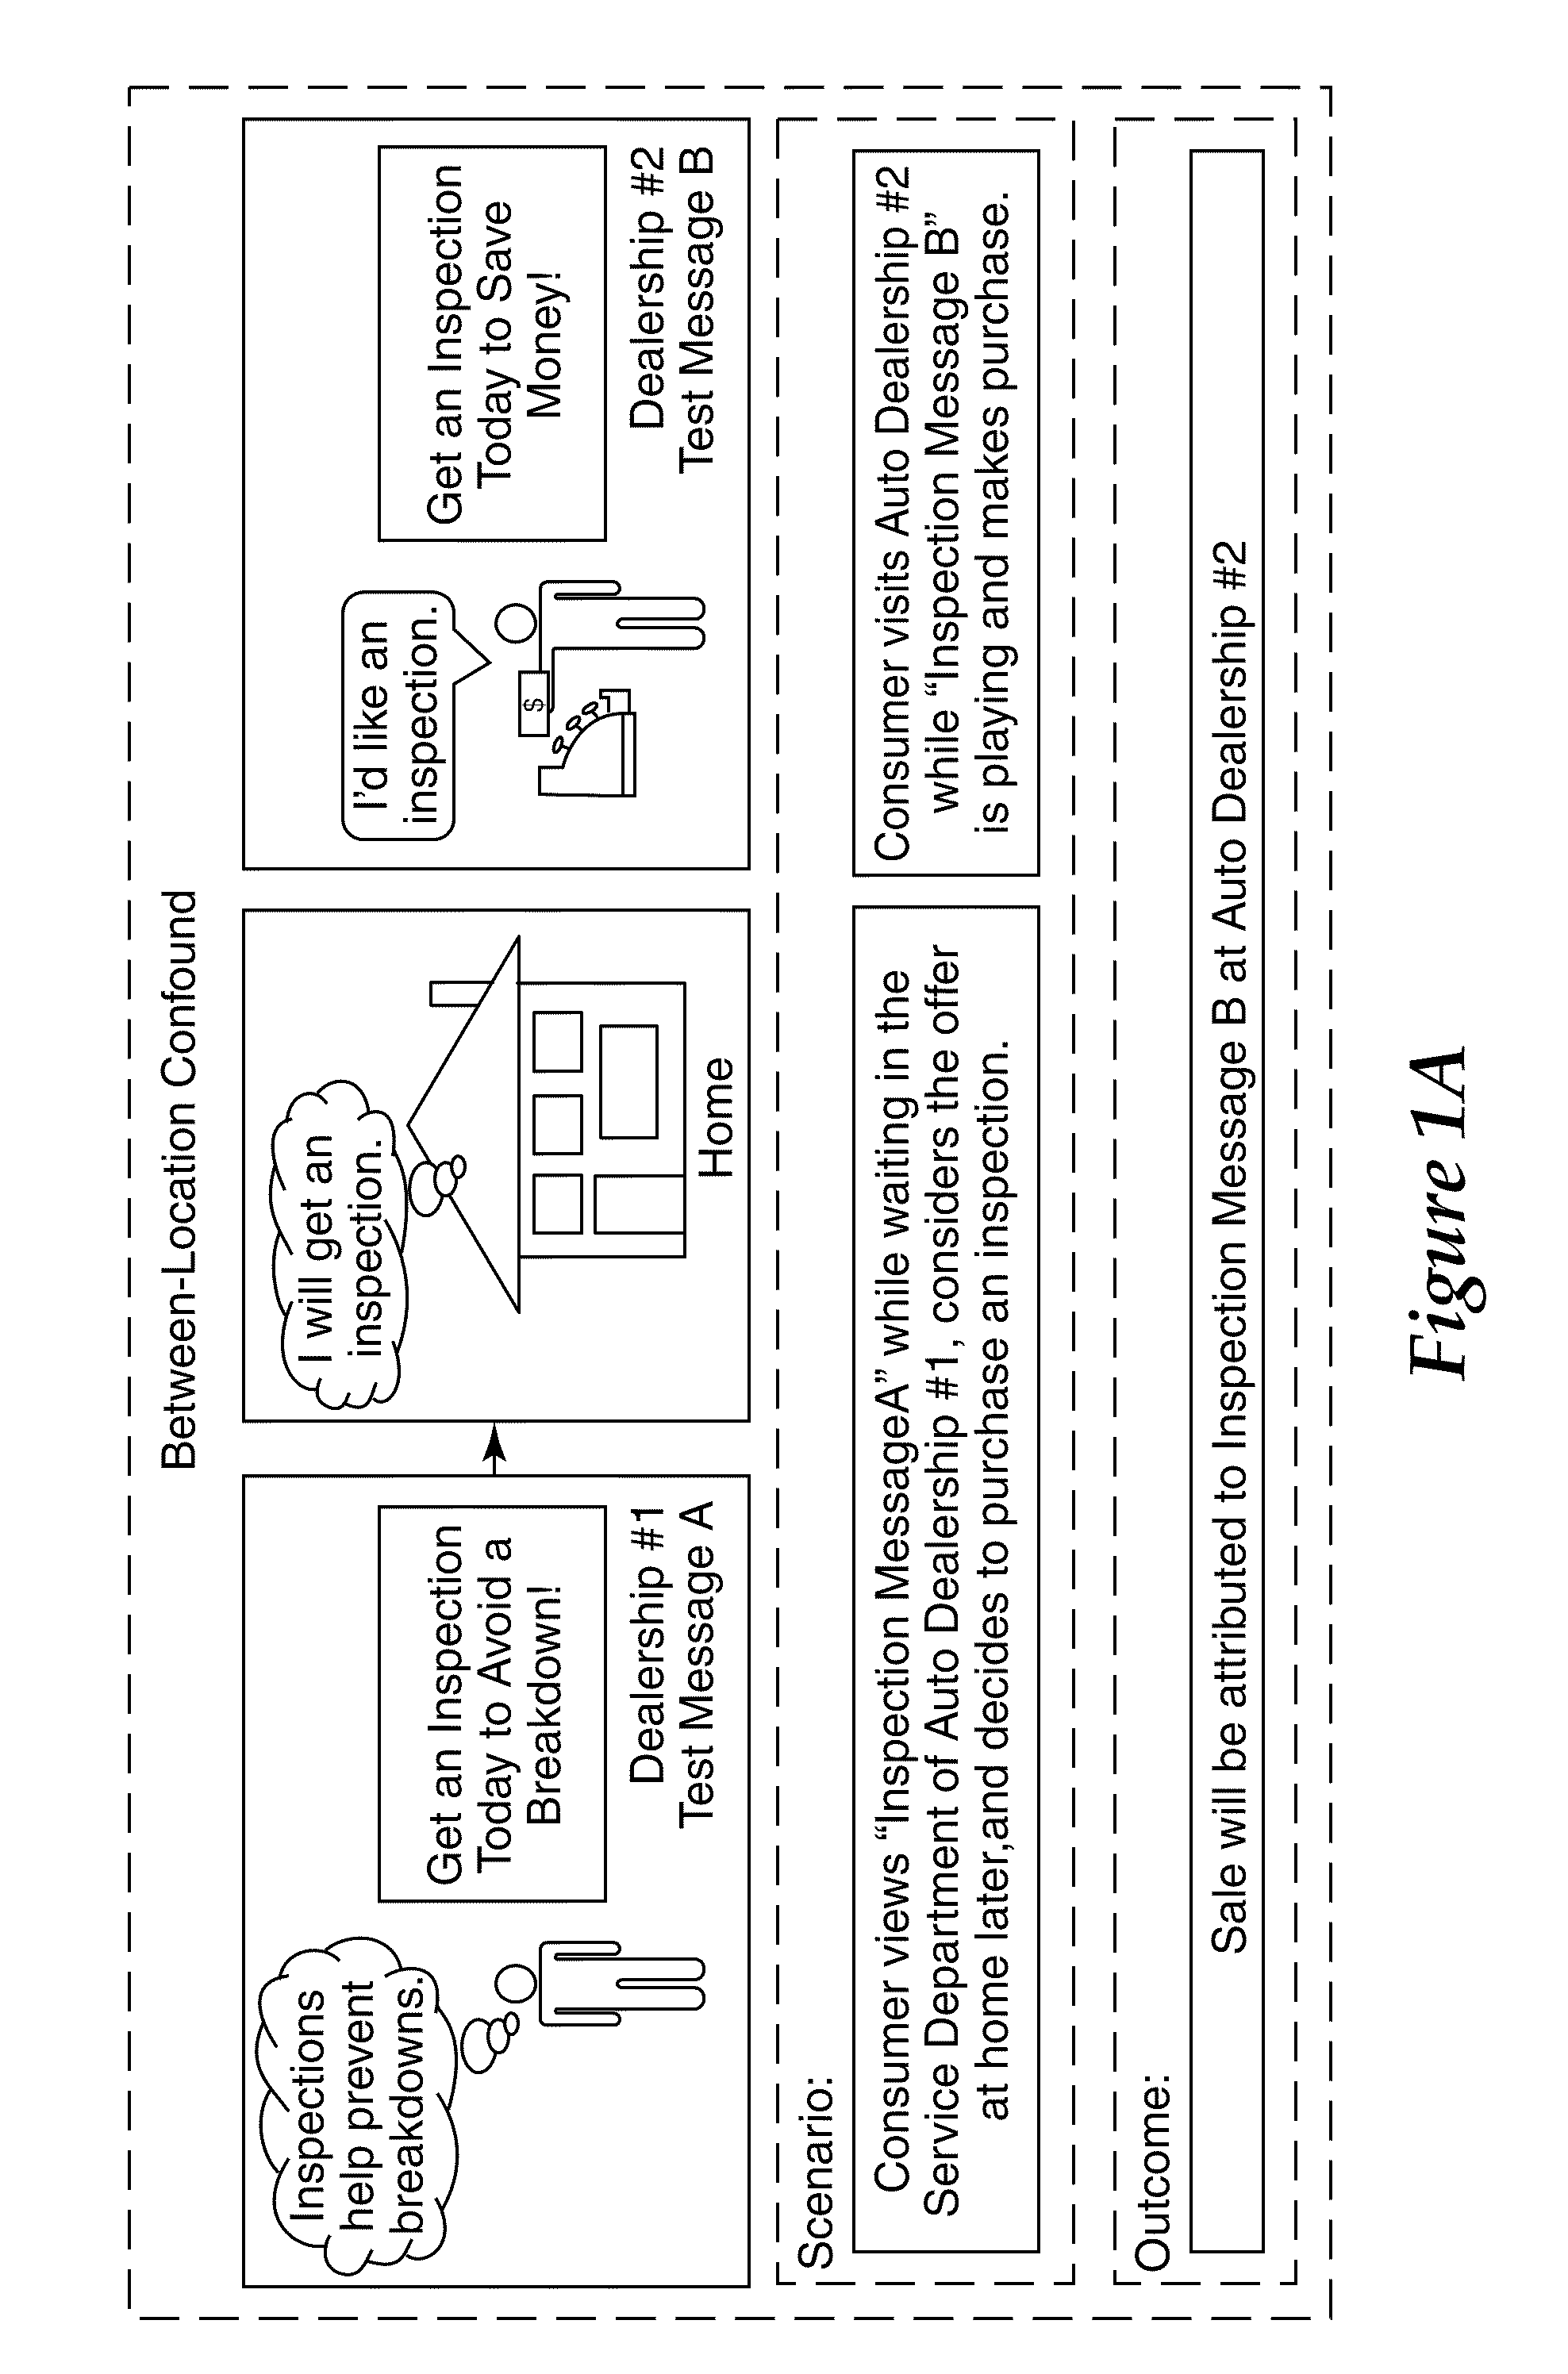 System and method for assessing effectiveness of communication content